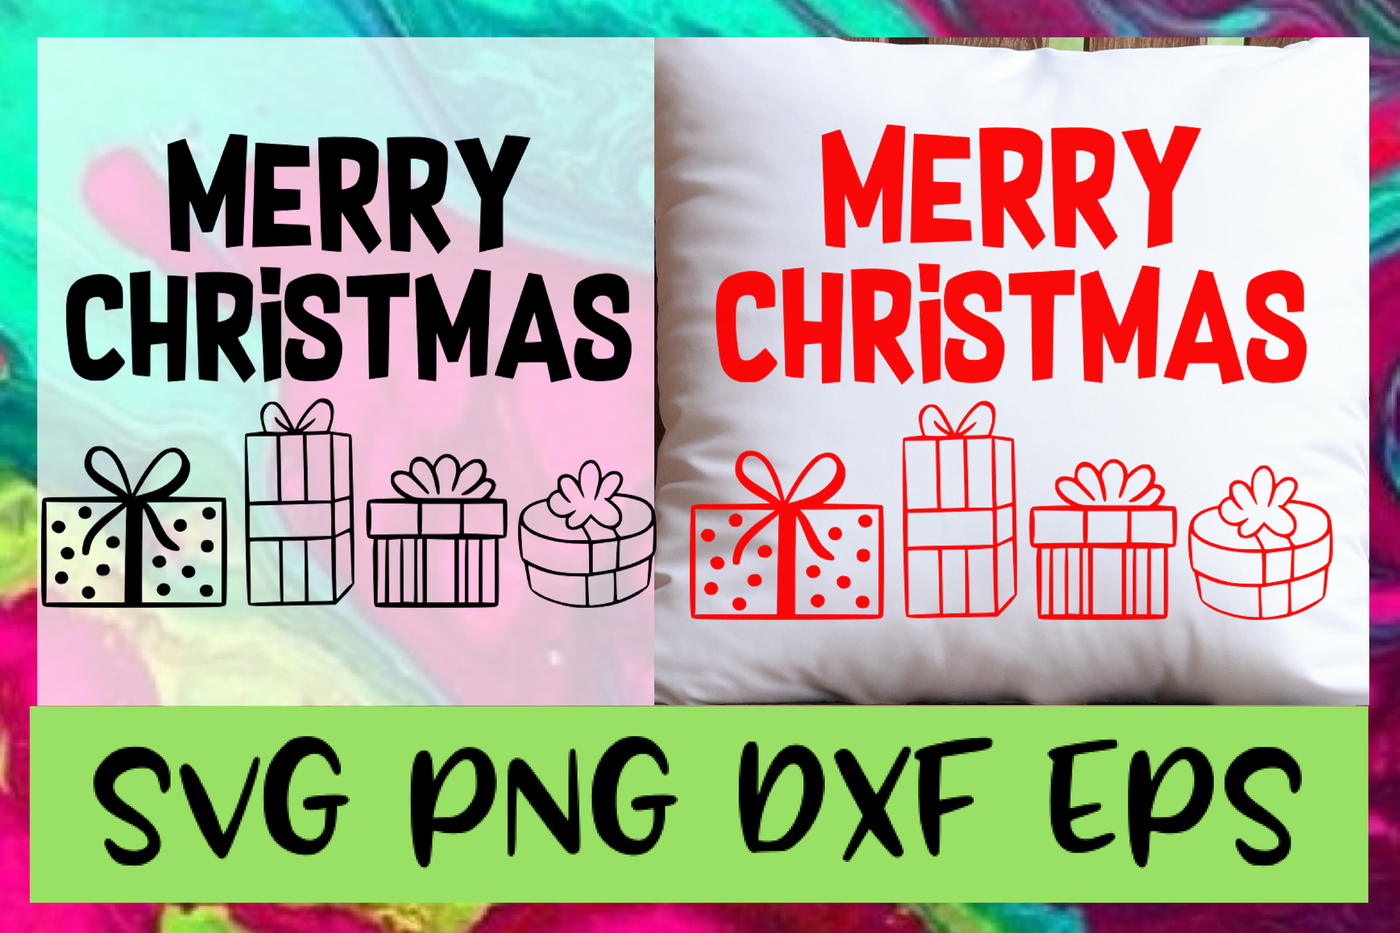 Merry Christmas Svg Png Dxf Eps Design Cut Files By Emsdigitems